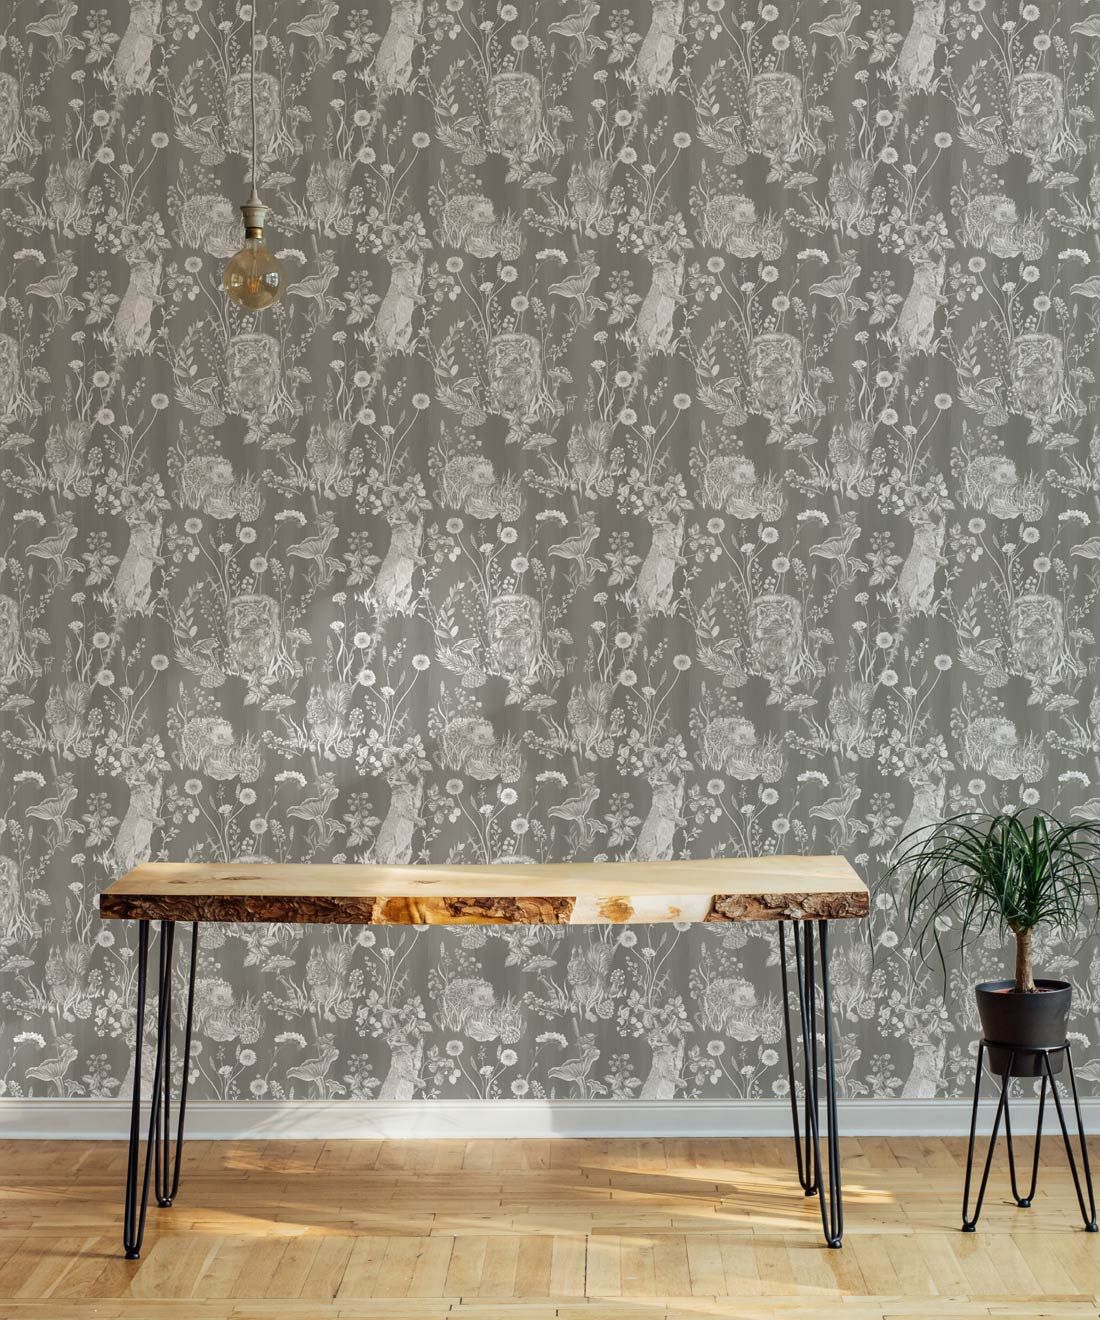 Woodland Friends Wallpaper • Forest Wallpaper with rabbits, hares, raccoons • Iryna Ruggeri • Grey • Insitu